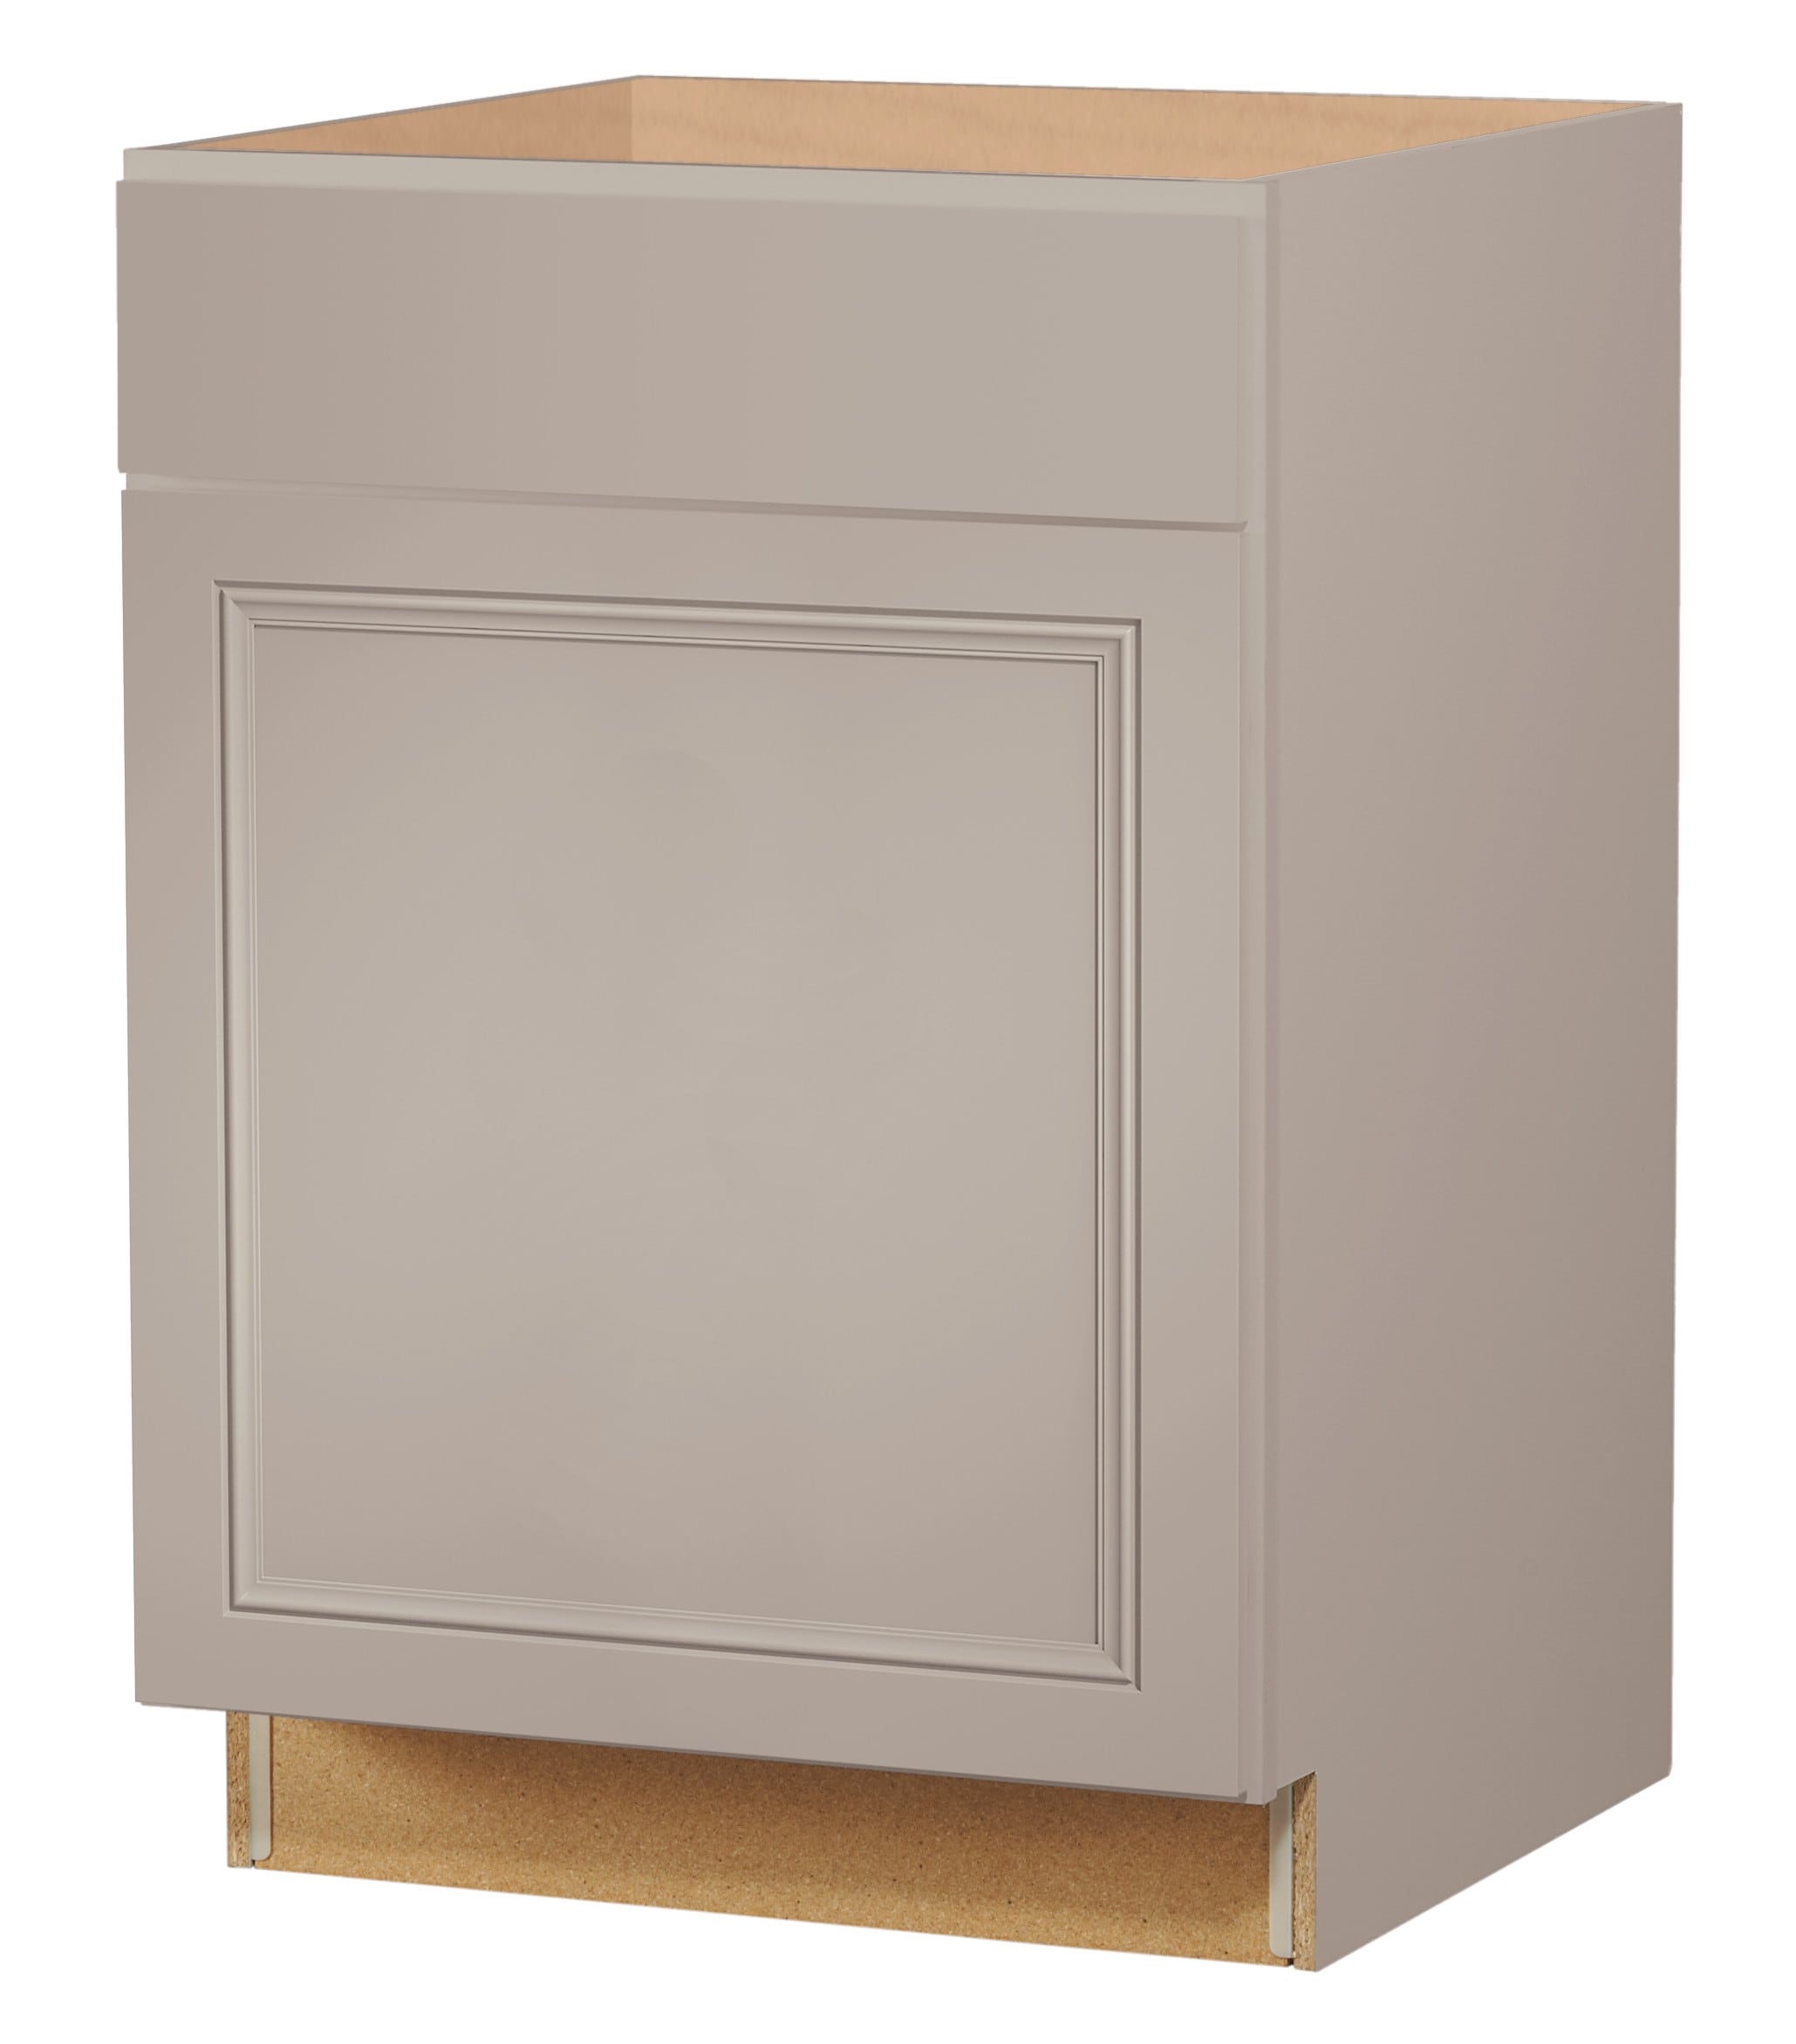 KCD-LV-V21-PA - KCD - Lenox Canvas - 21 Vanity Base Cabinet - Preassembled  - Discount Custom Cabinets